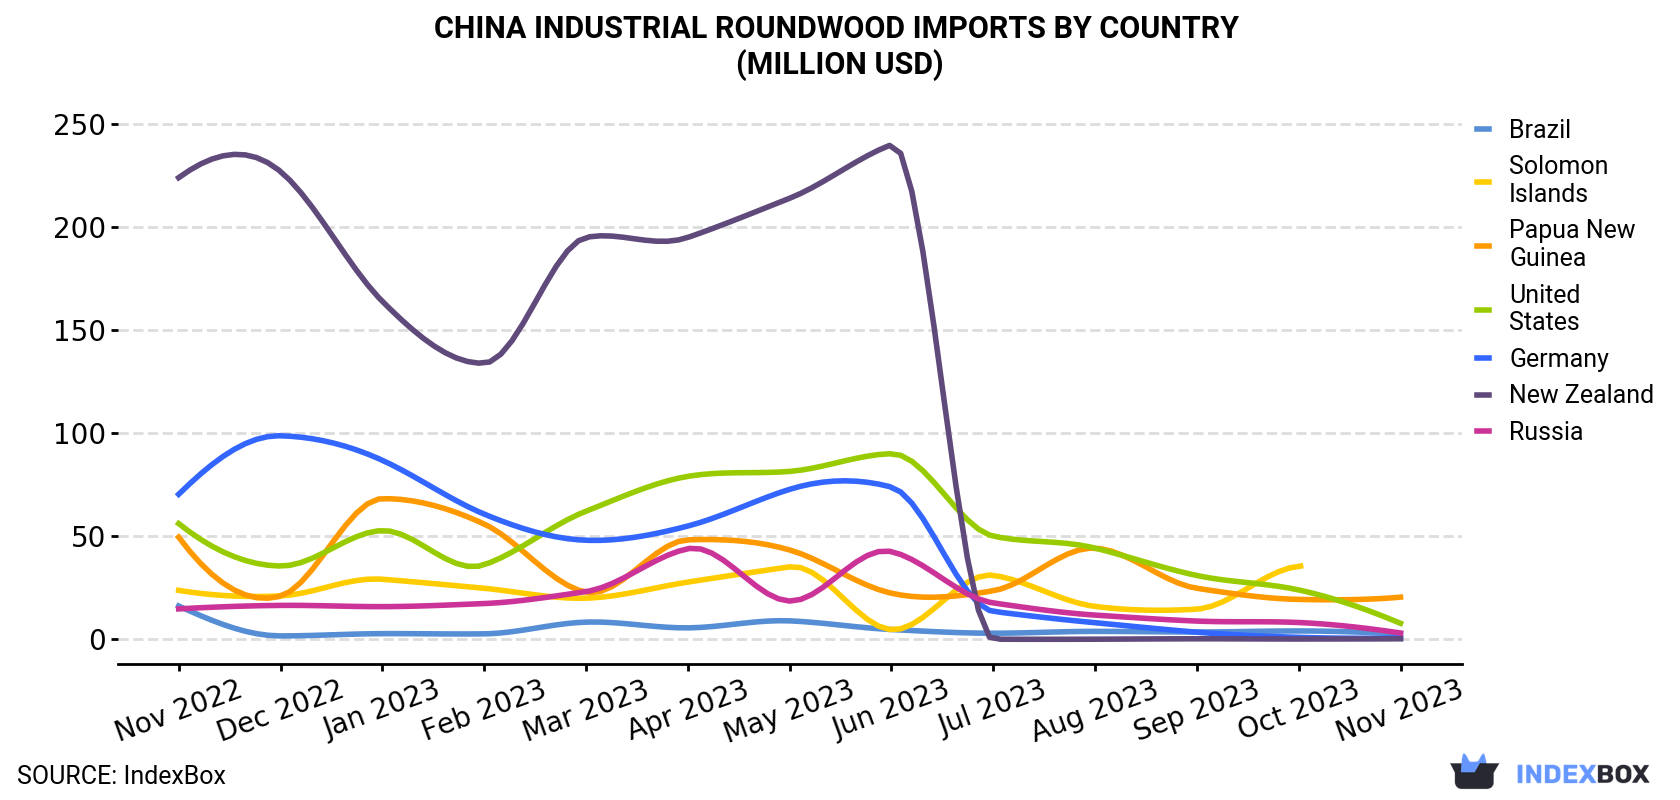 China Industrial Roundwood Imports By Country (Million USD)